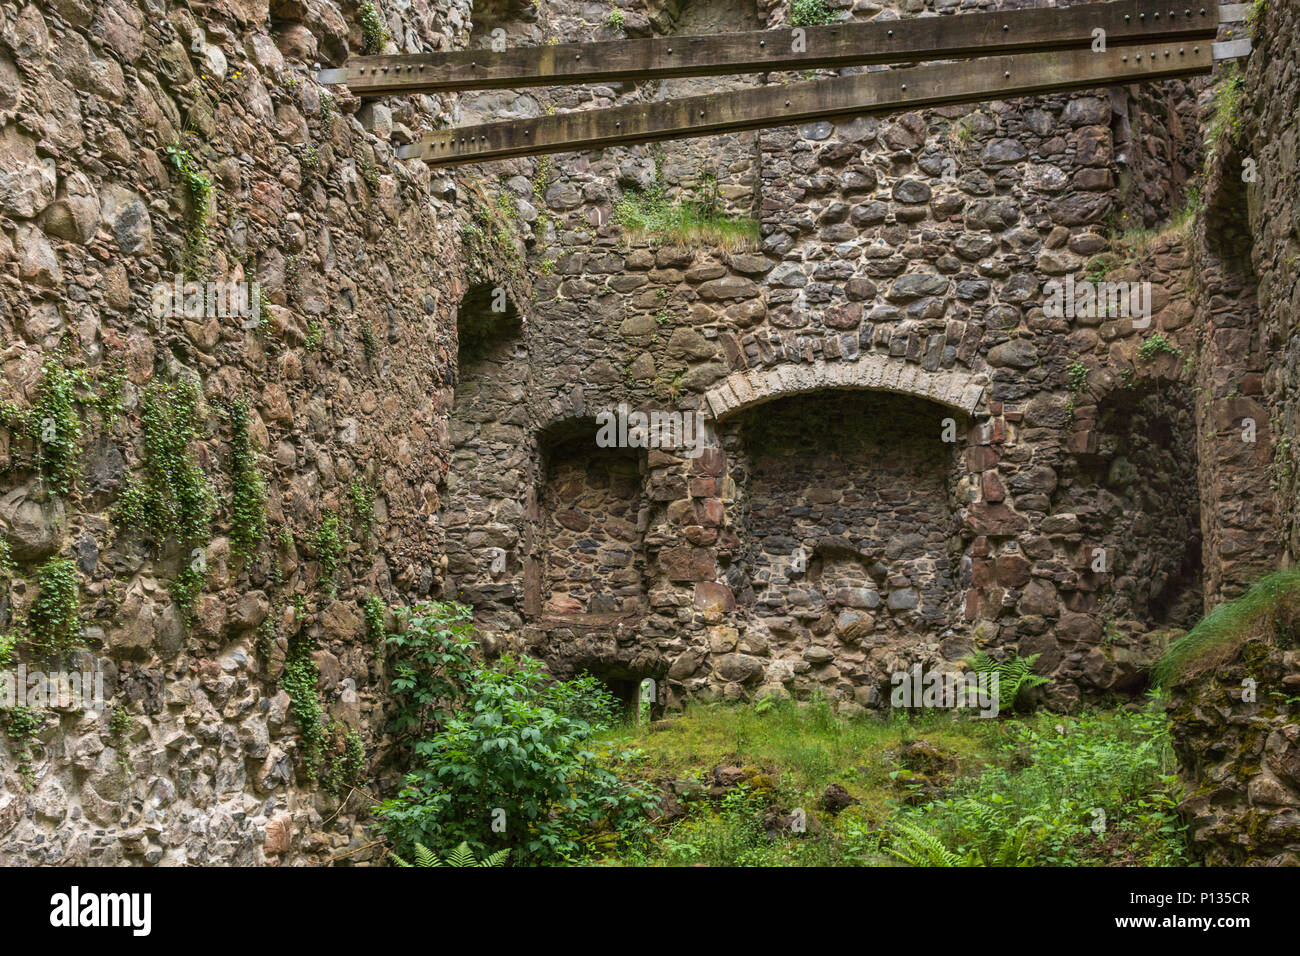 Invergarry, Scotland - June 11, 2012: Tall dark-brown ruined inside walls with wooden studs to support them at castle Invergarry. Weeds have conquered Stock Photo